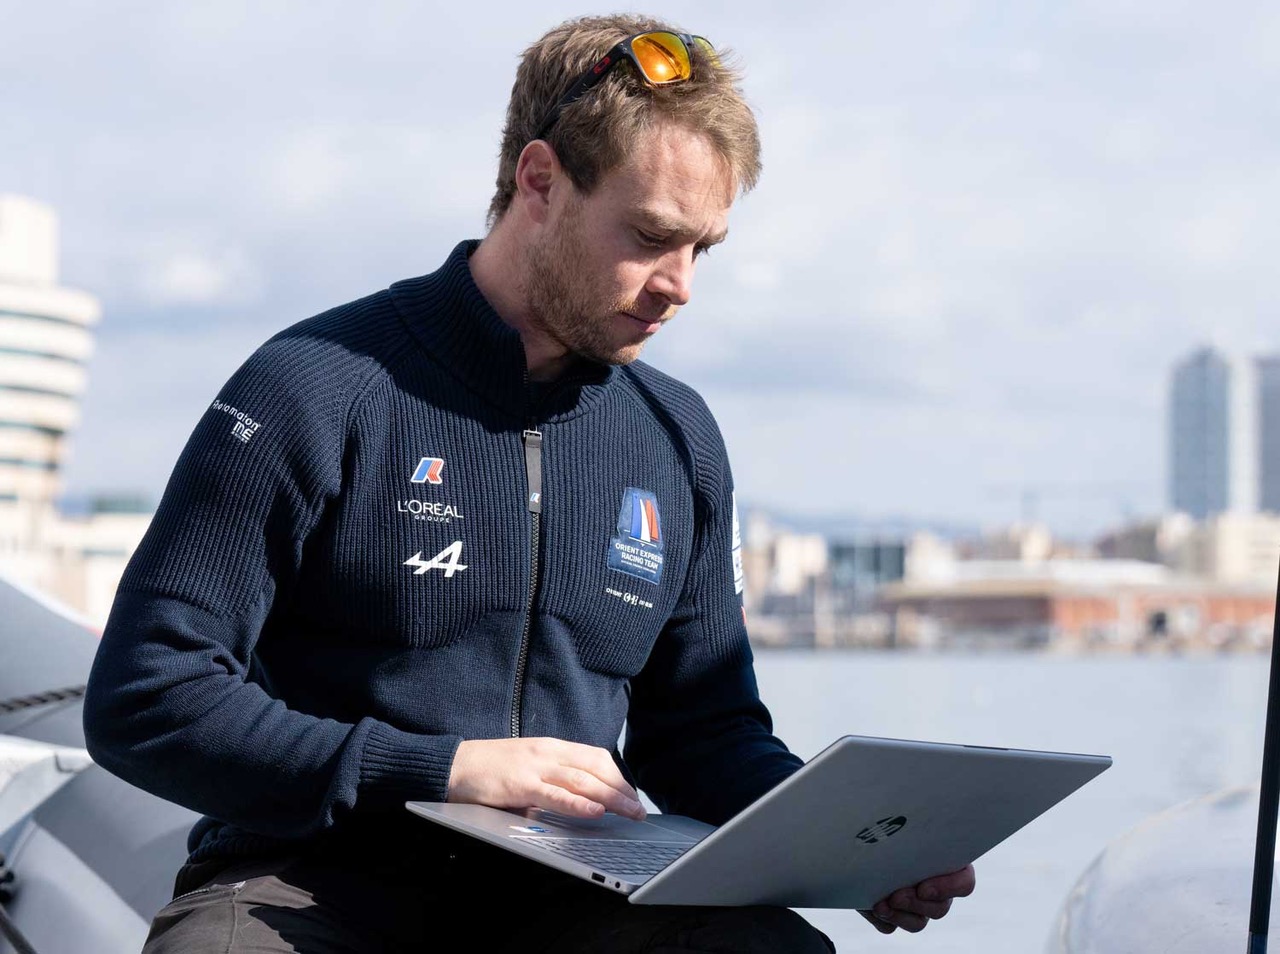 The Orient Express Racing Team improves performance with HP 3D printing technology